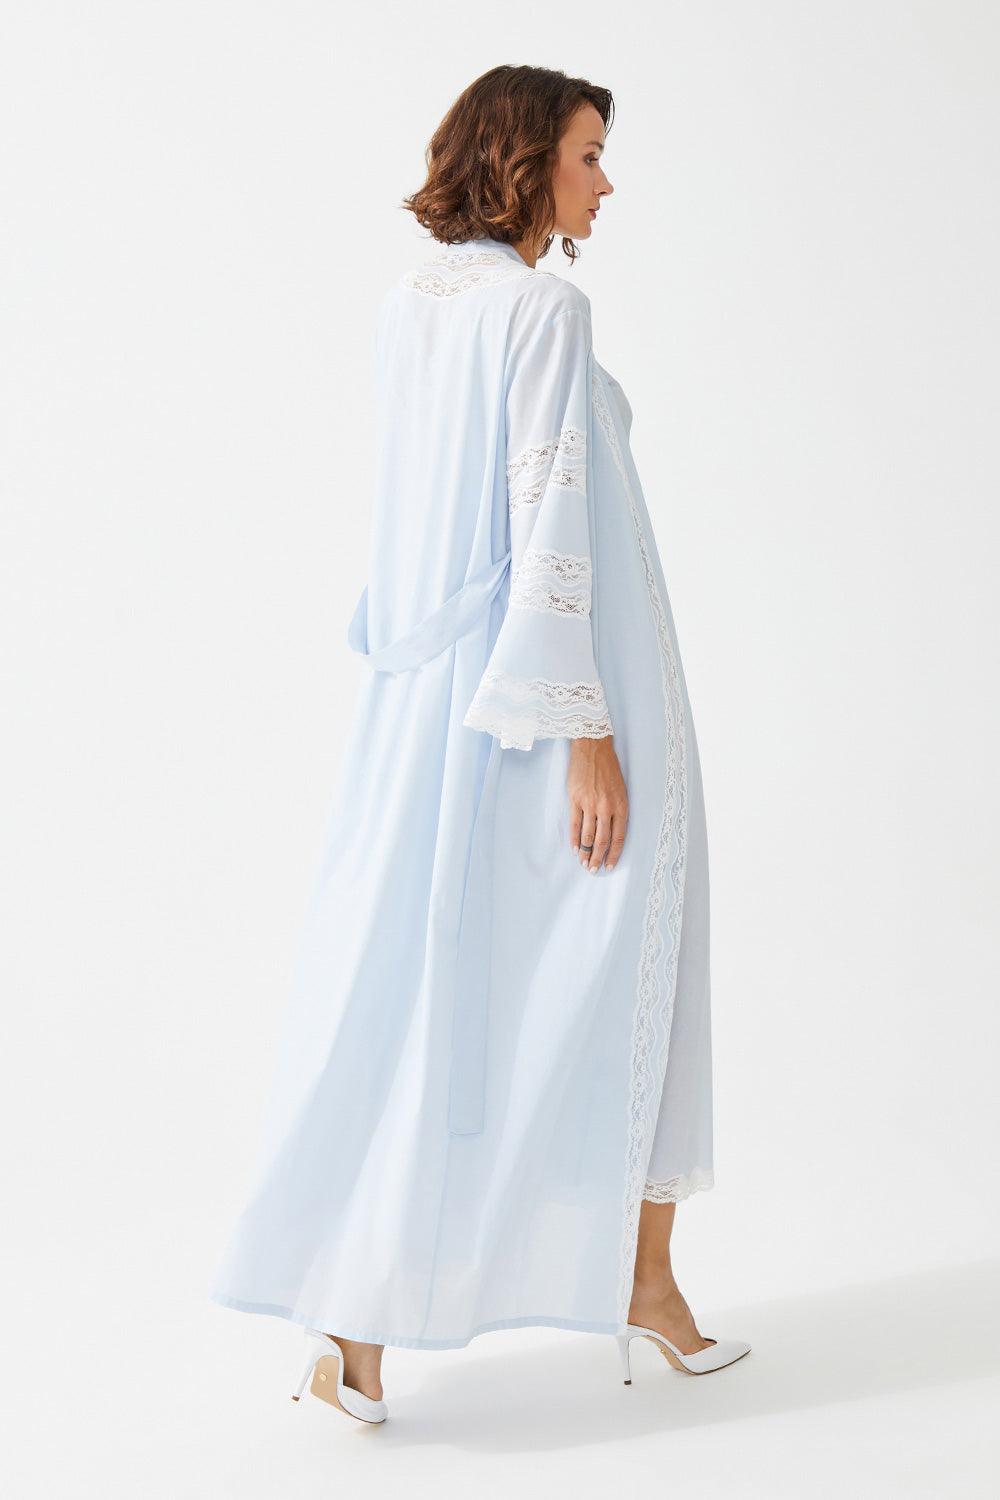 Asterid Trimmed Cotton Voile Long Sleeve Robe Set - Baby Blue - Bocan